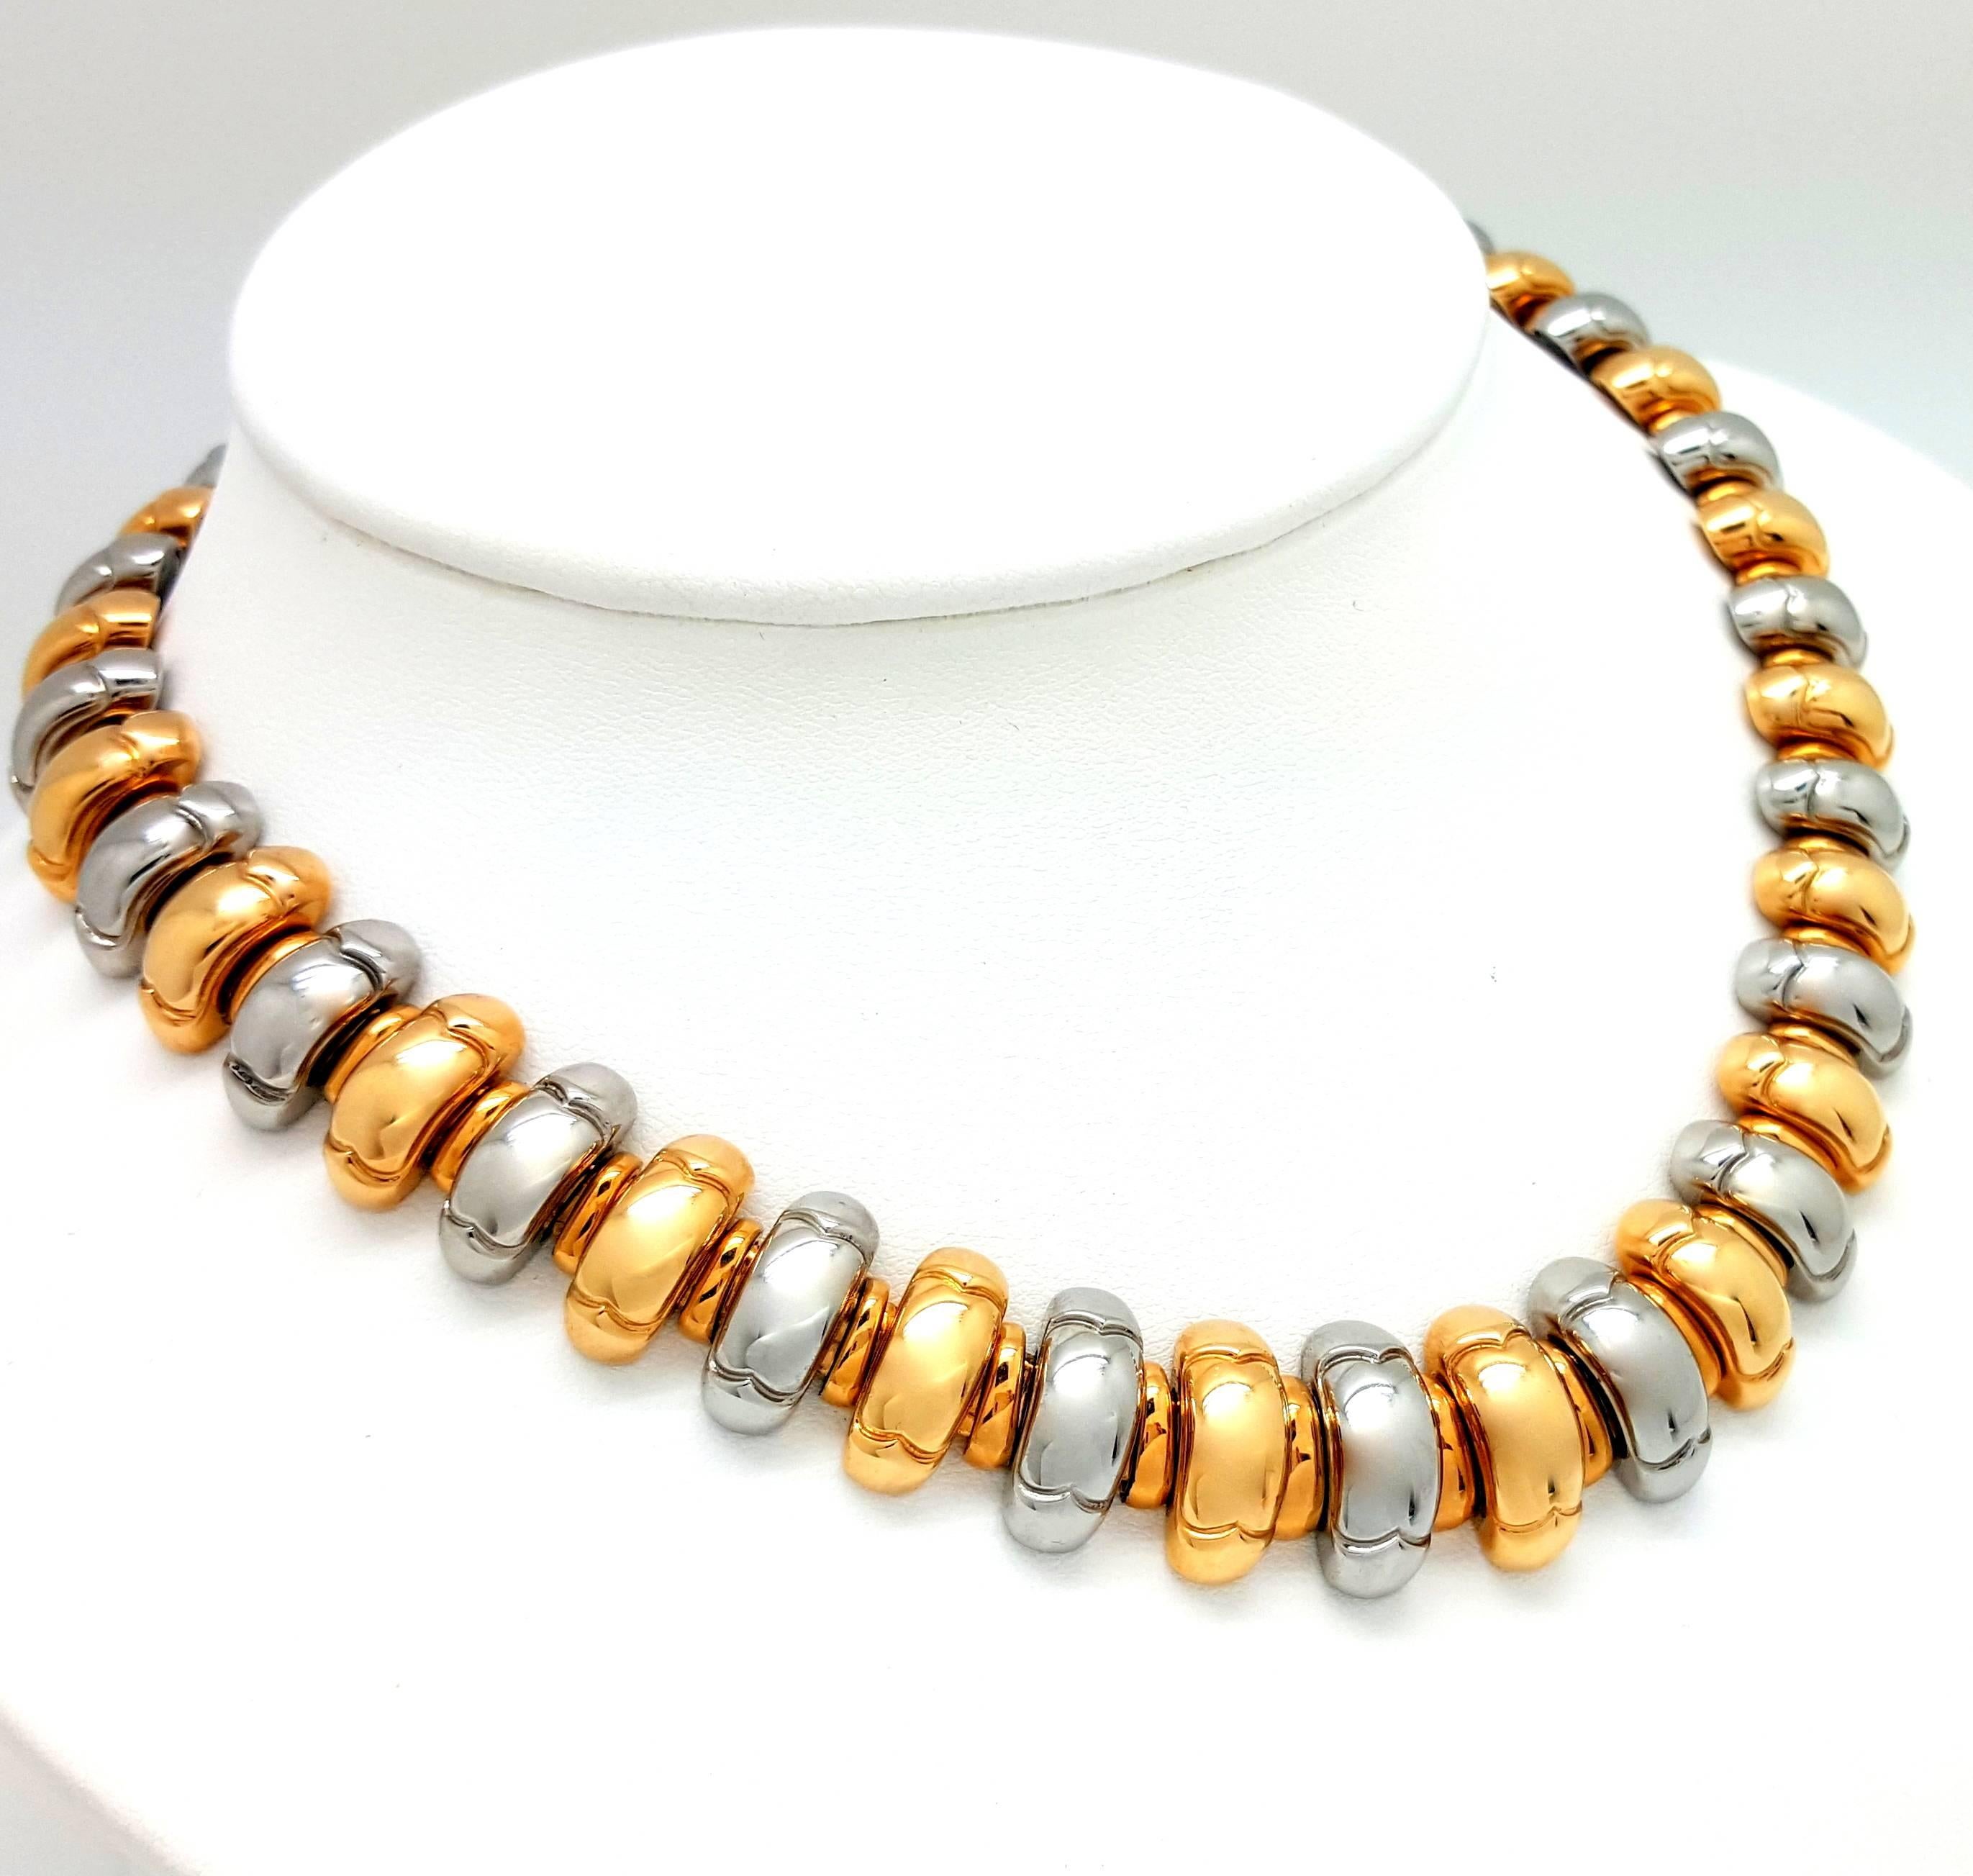 This heavy-weight Bvlgari necklace is made in solid 18k white gold and 18k yellow gold links. The links measure 17mm wide, and the necklace measures 15.5 inches long. The necklace weighs 113.87 grams.